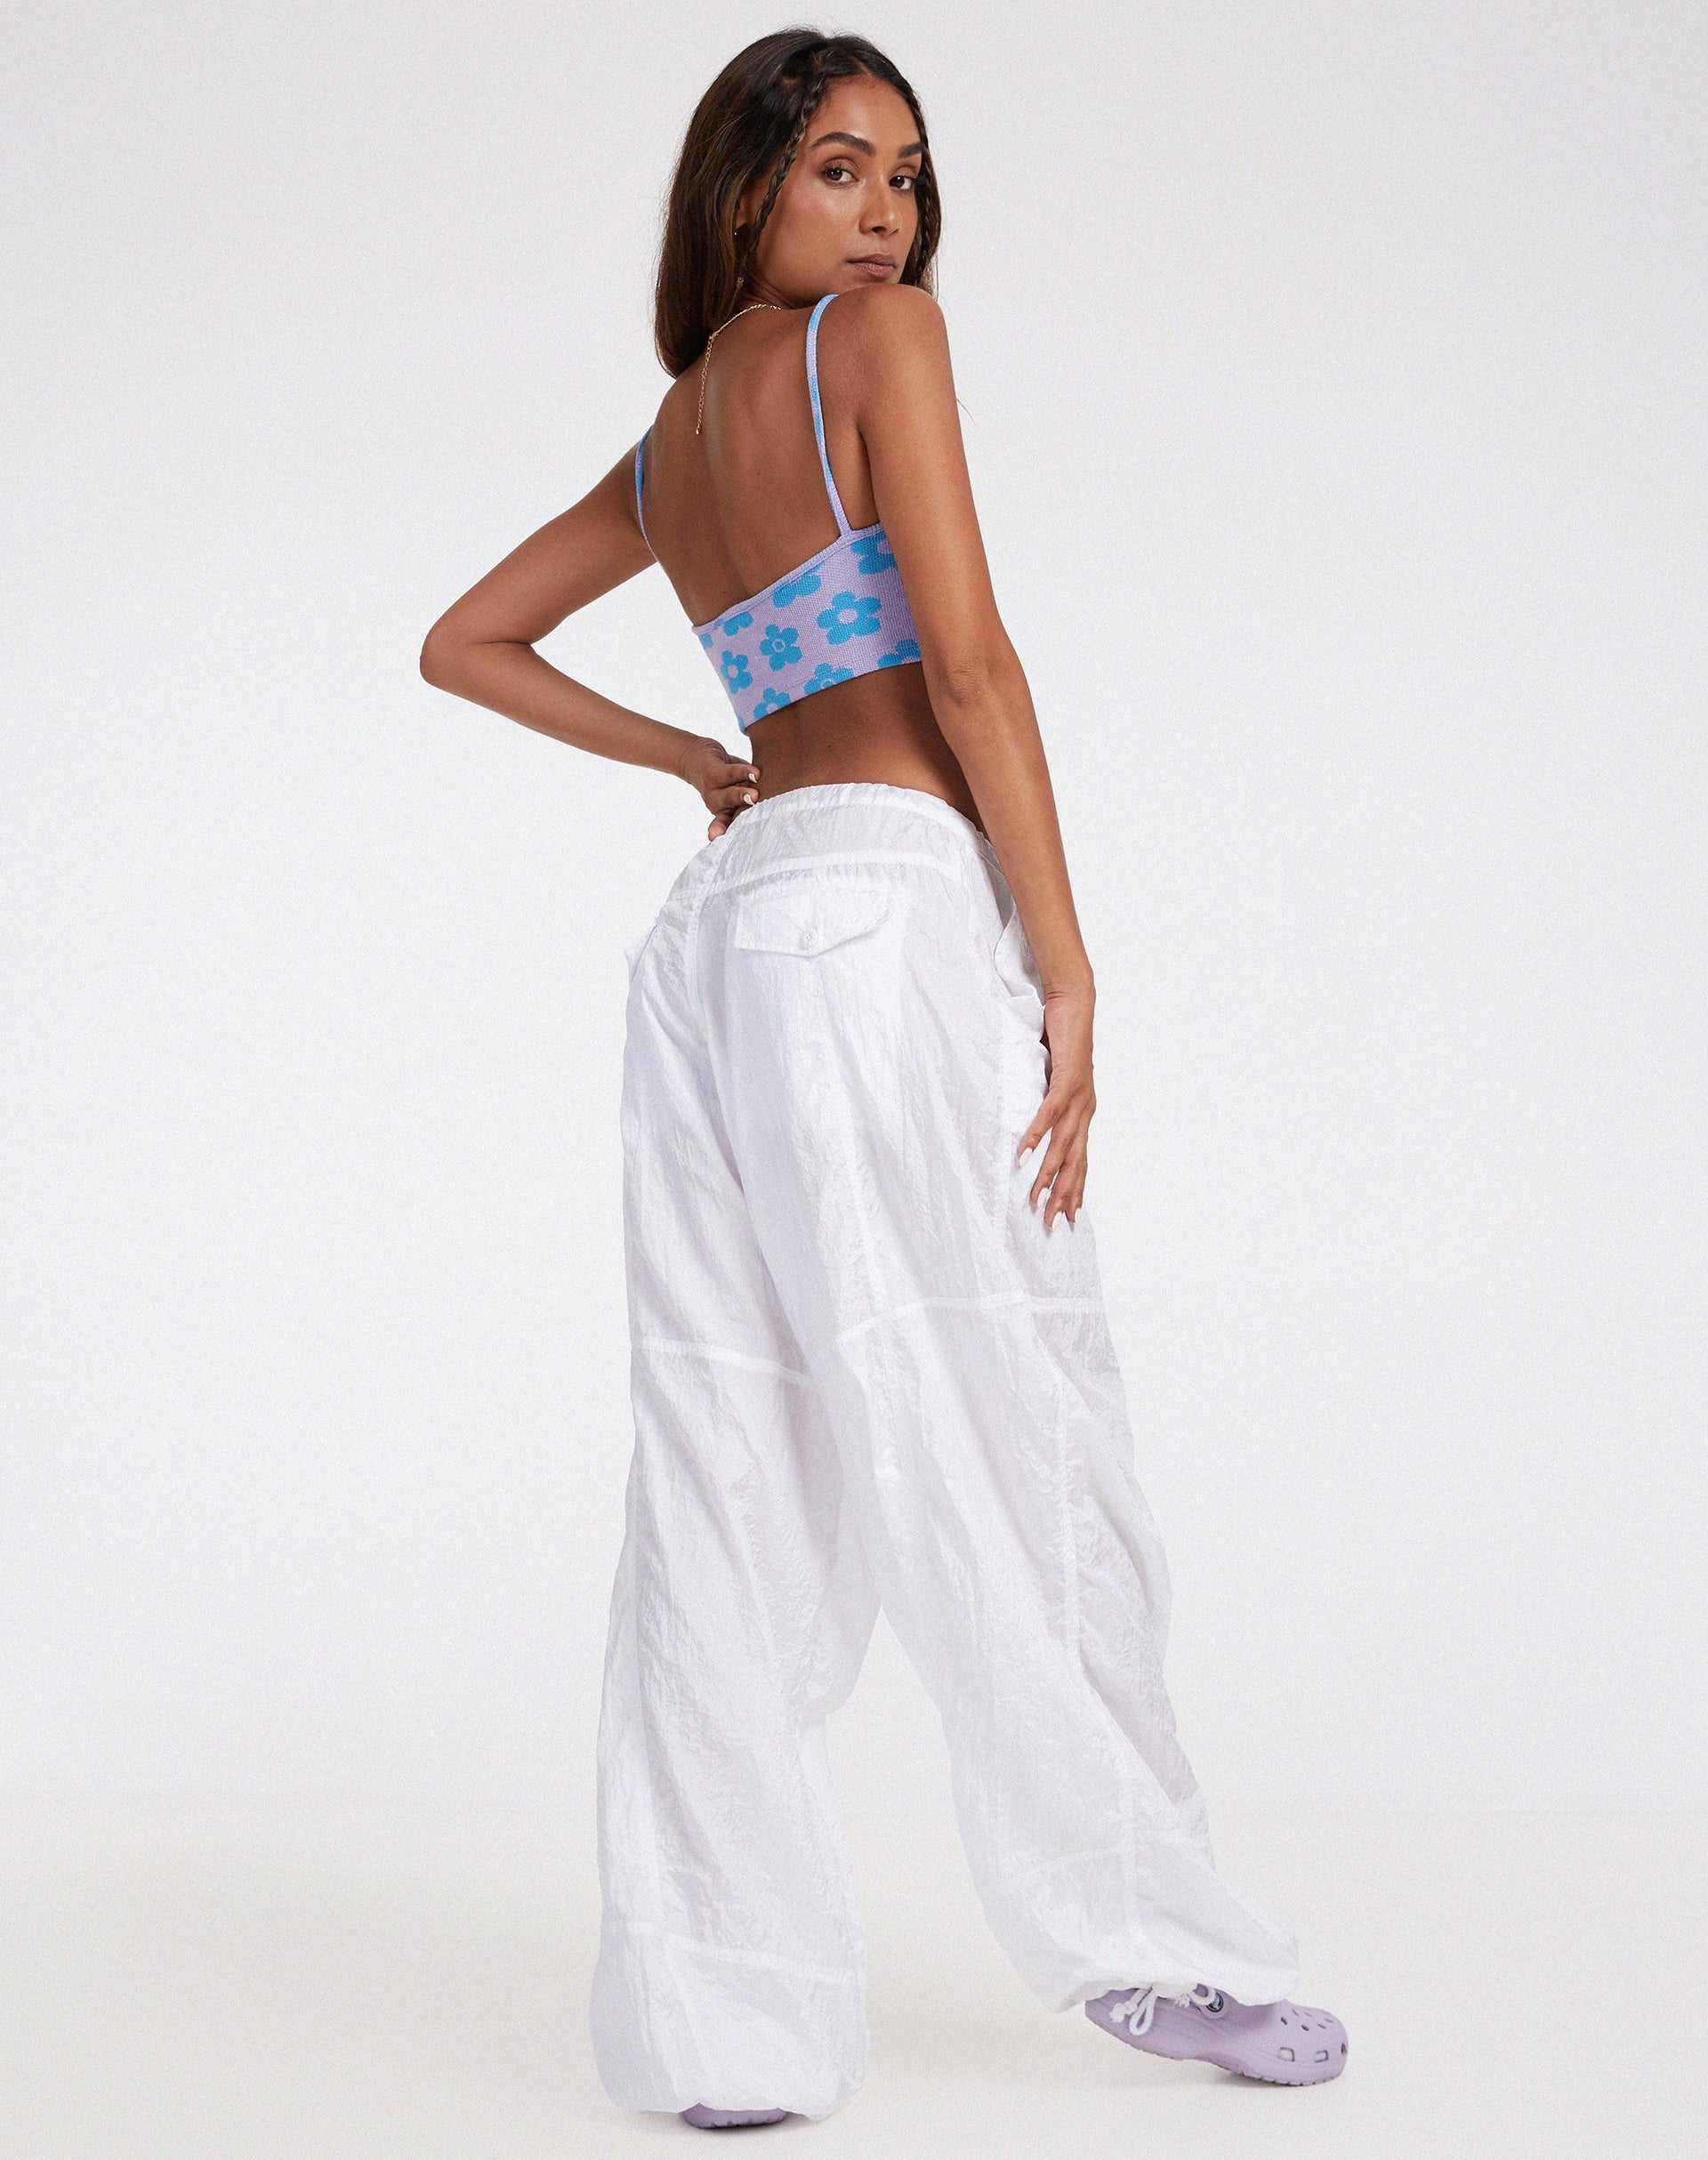 image of Tala Crop Top in Cute Floral Daisy Lilac and Blue